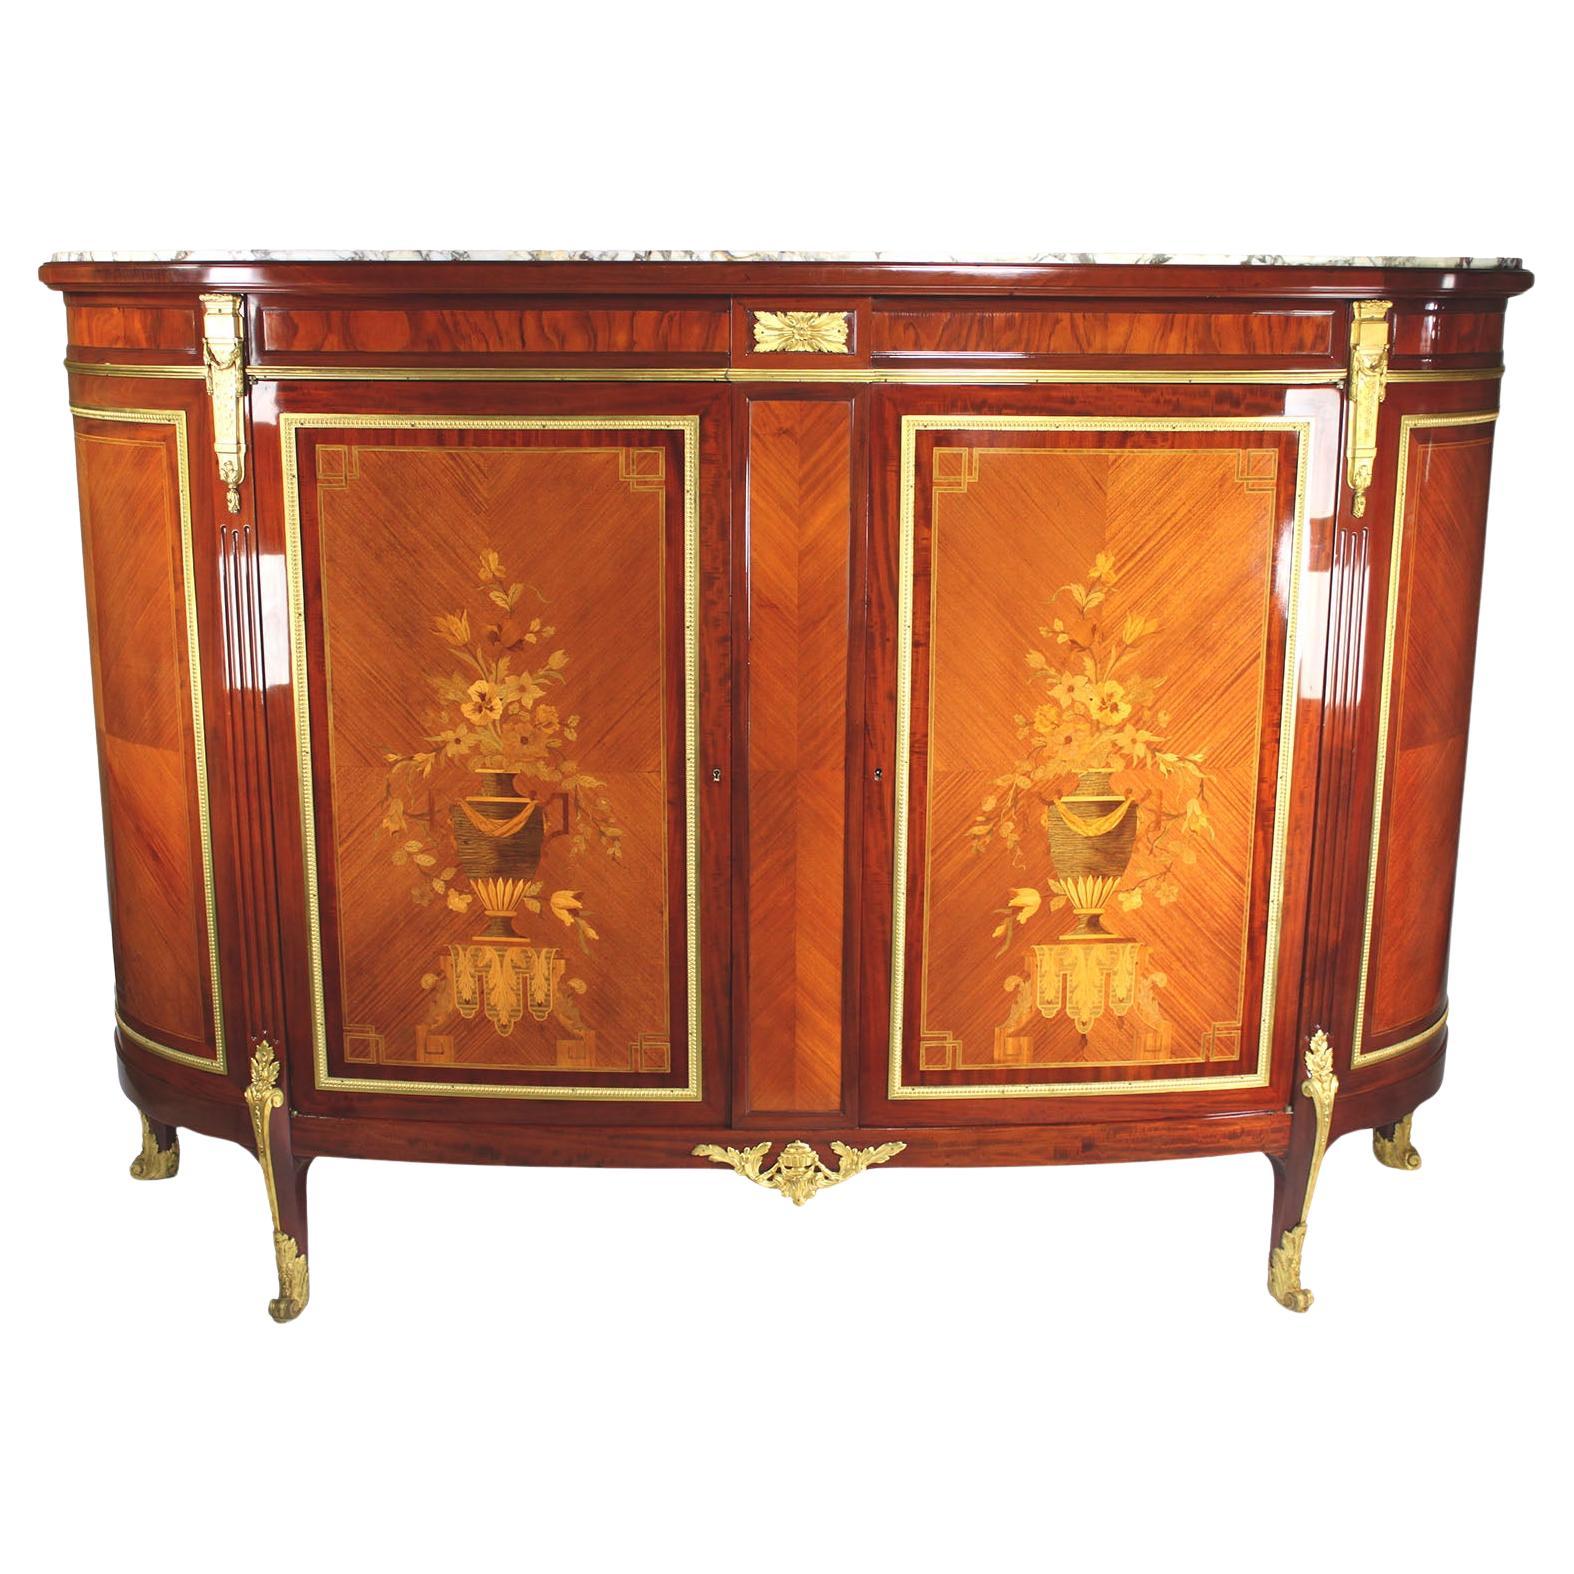 French 19th-20th C. Louis XV Style Mahogany Ormolu Mounted Buffet Server Cabinet For Sale